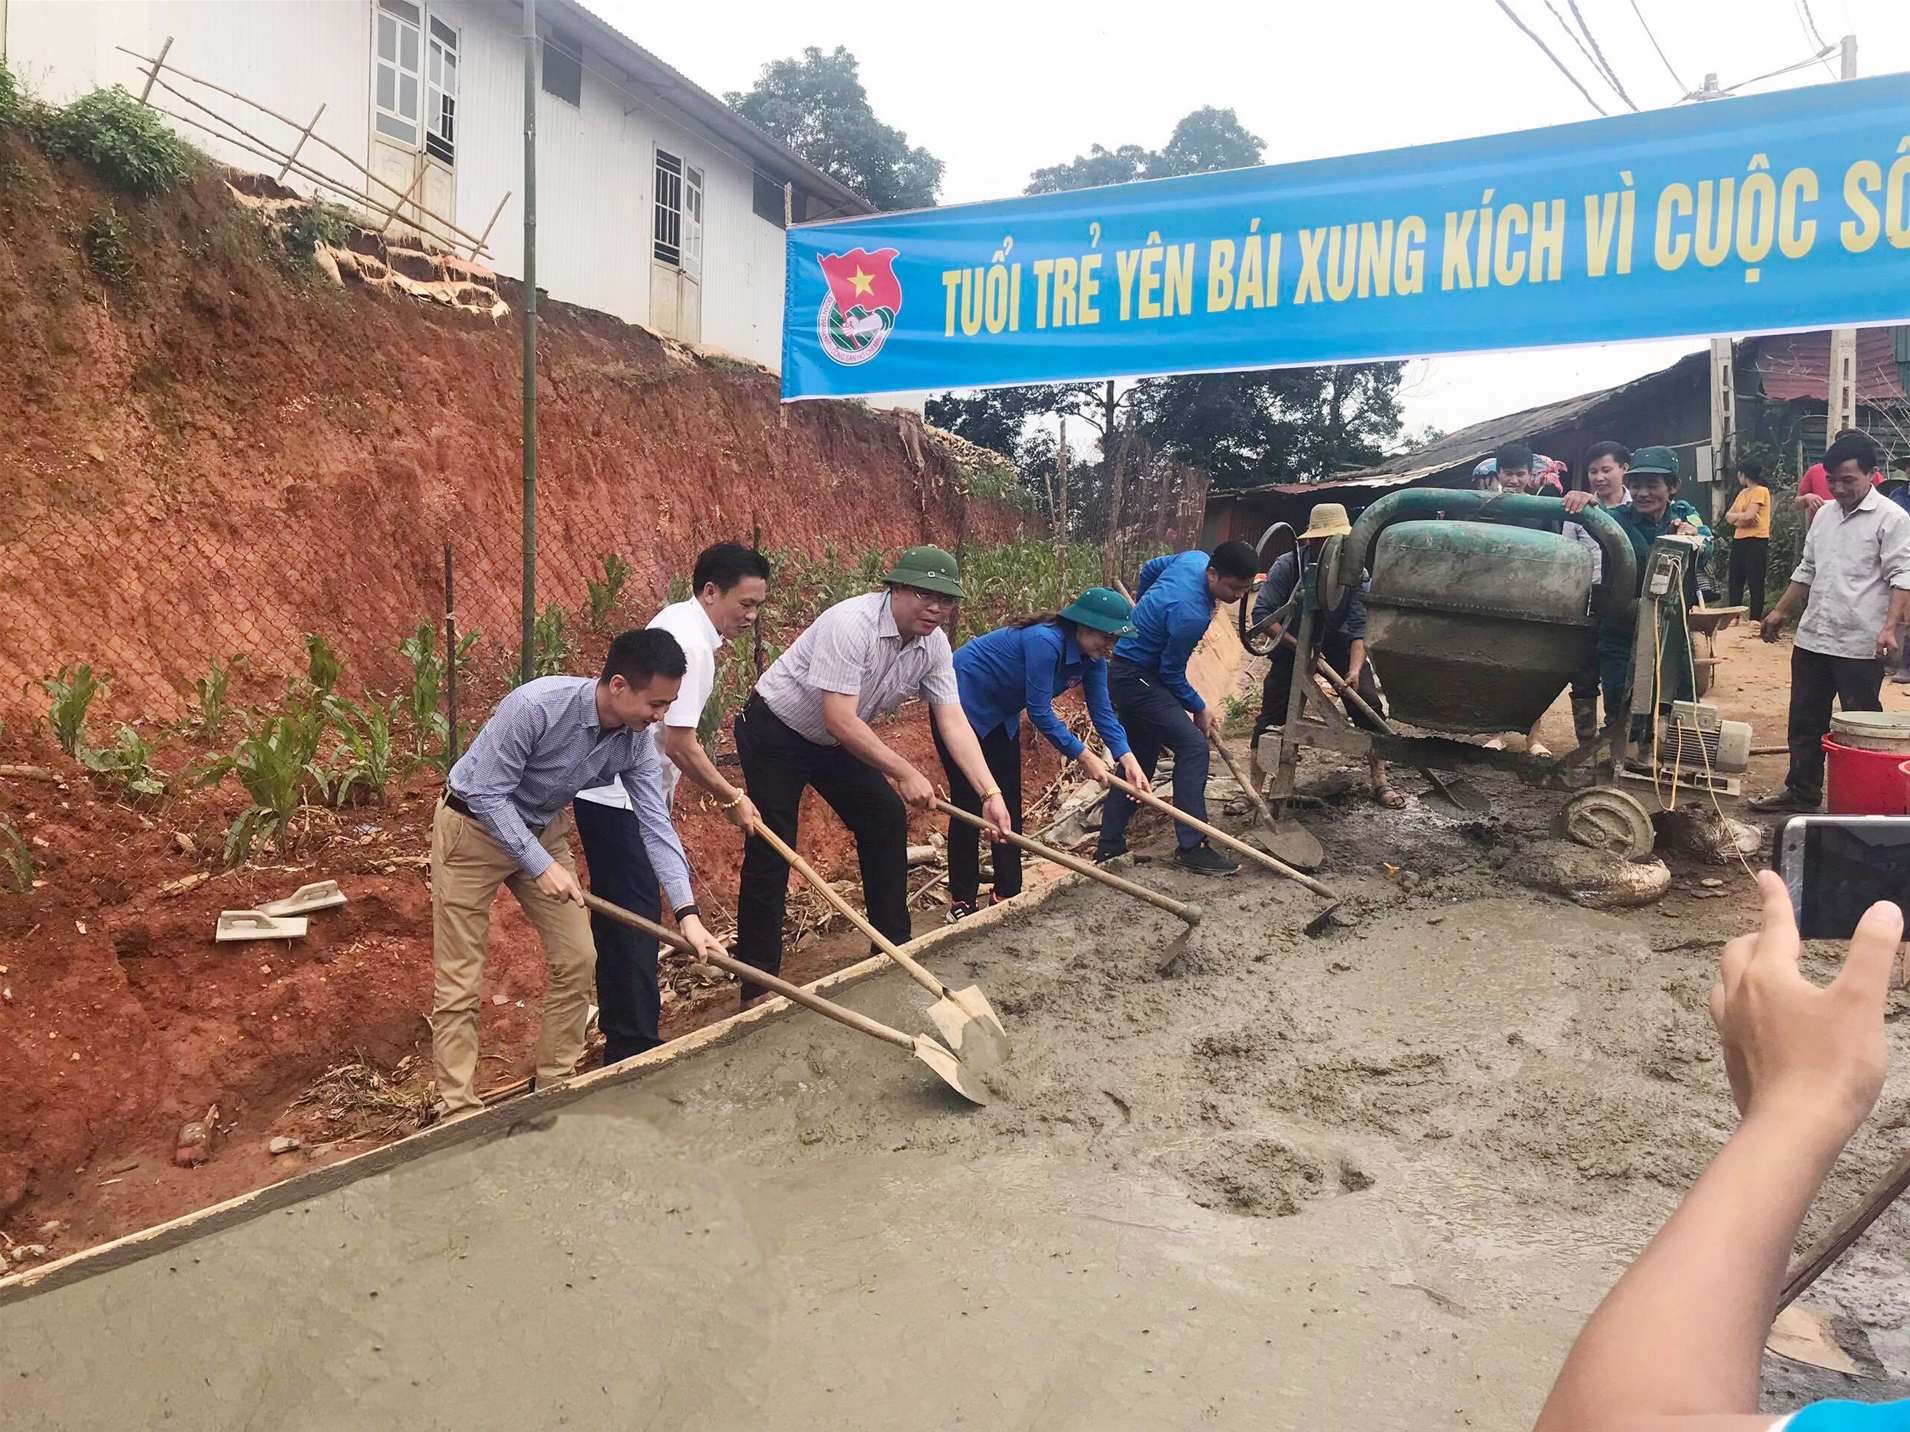 An Tien Industries joins hand to build “The road to school” at Mu Cang Chai